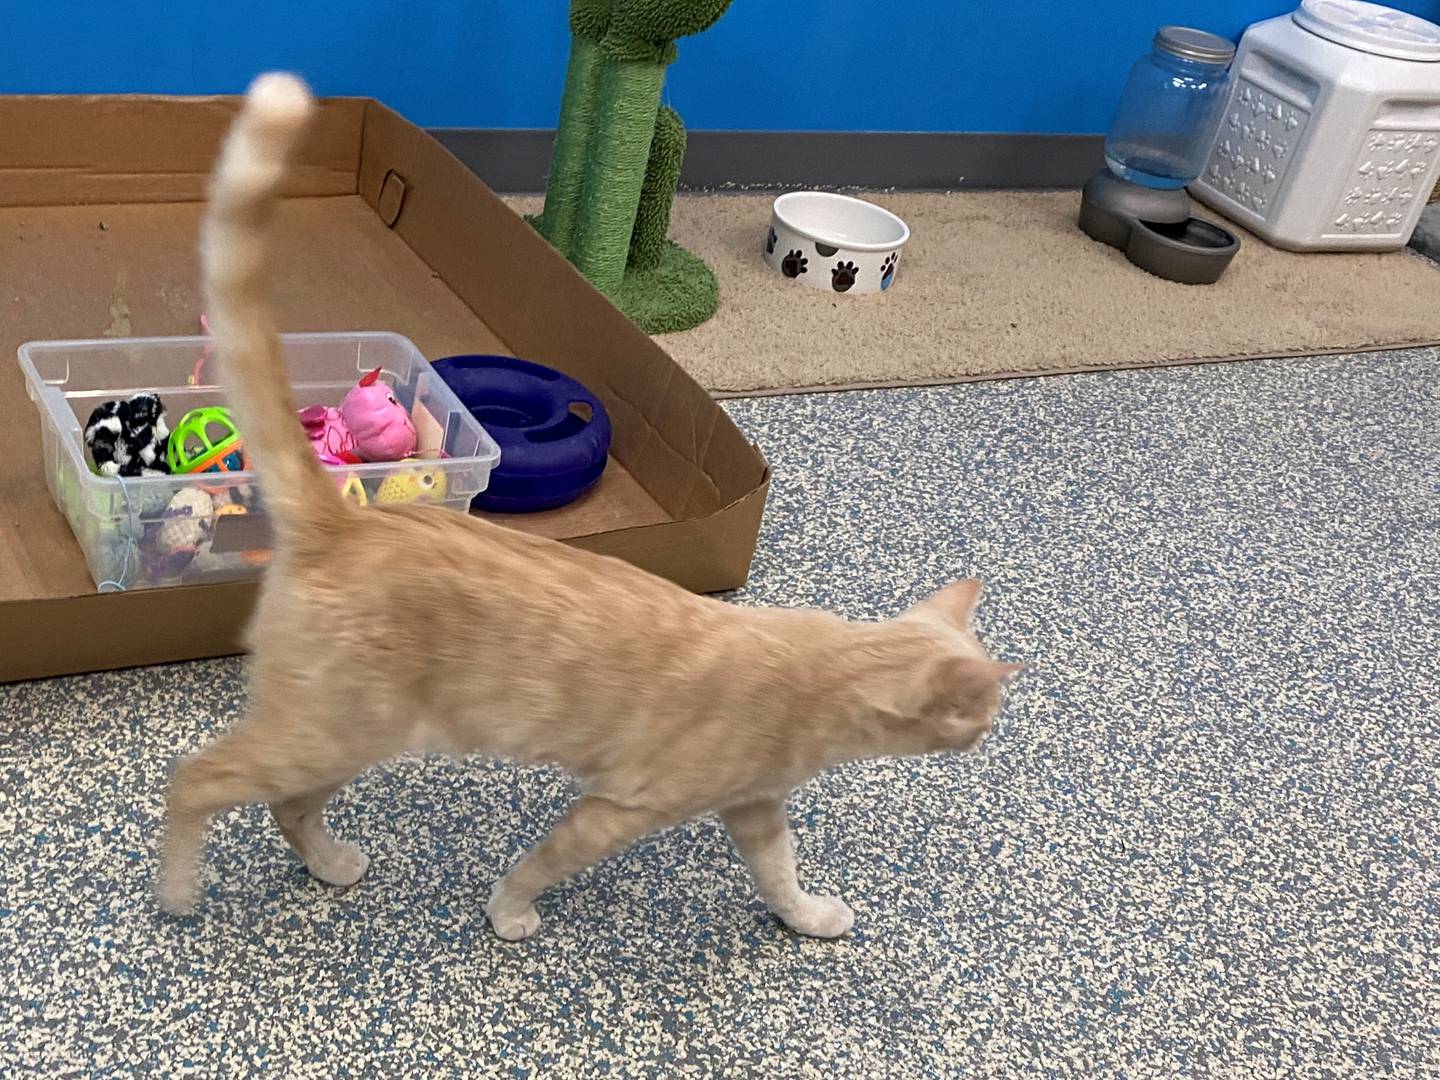 Gatsby is a three-and-a-half year old cat who is declawed. He is not running away in this picture, but rather going to bug his sister, Gwyneth.